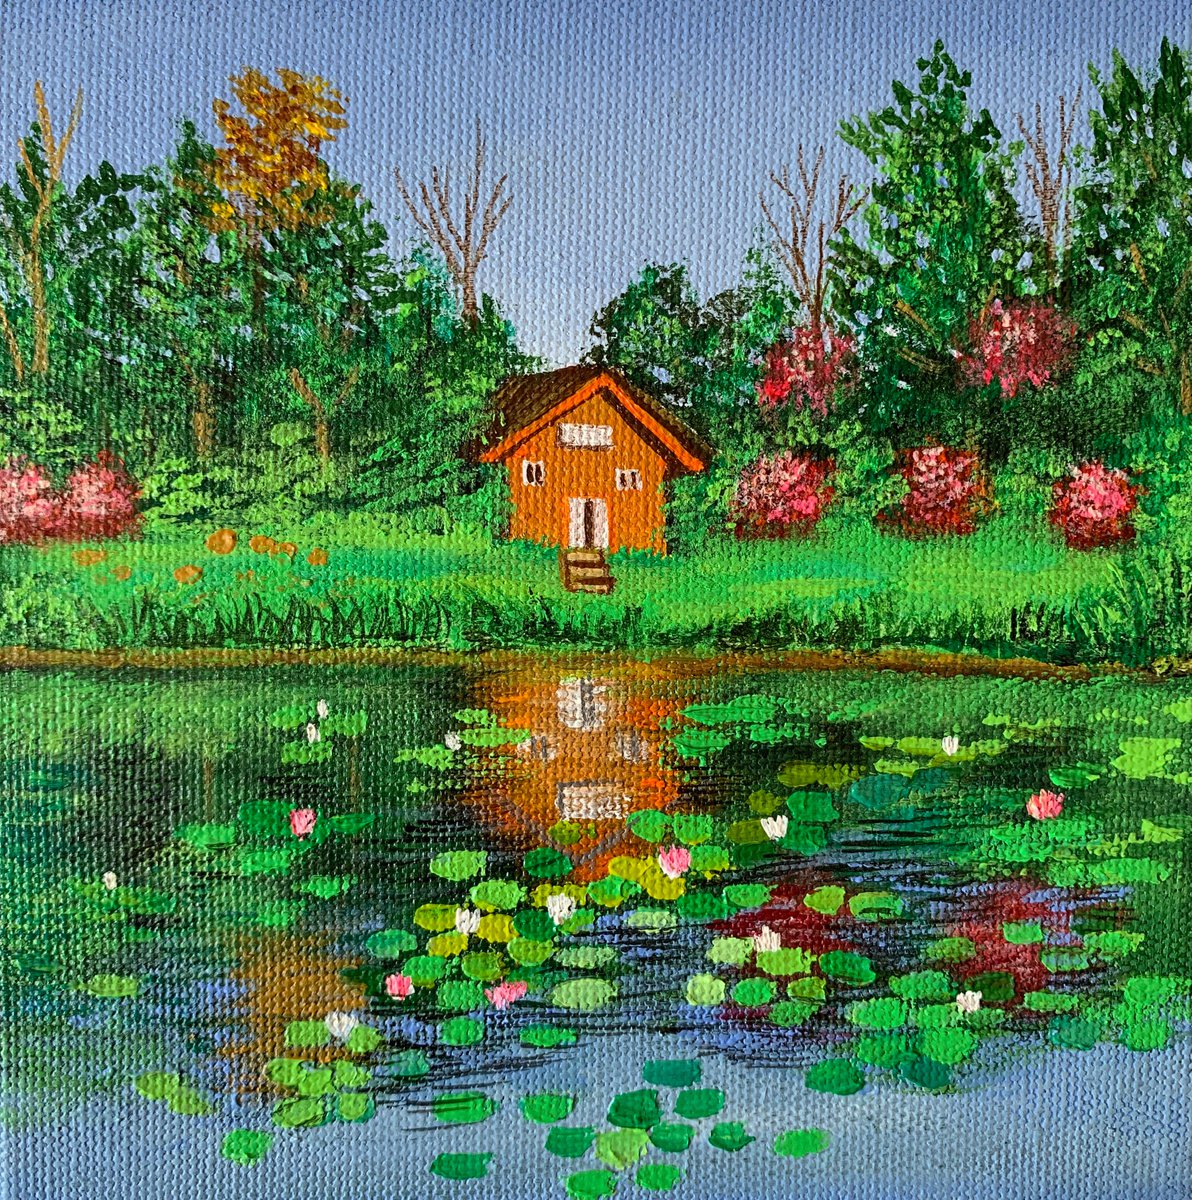 House by water lilies pond - 3 ! Small Painting!! Ready to hang by Amita Dand